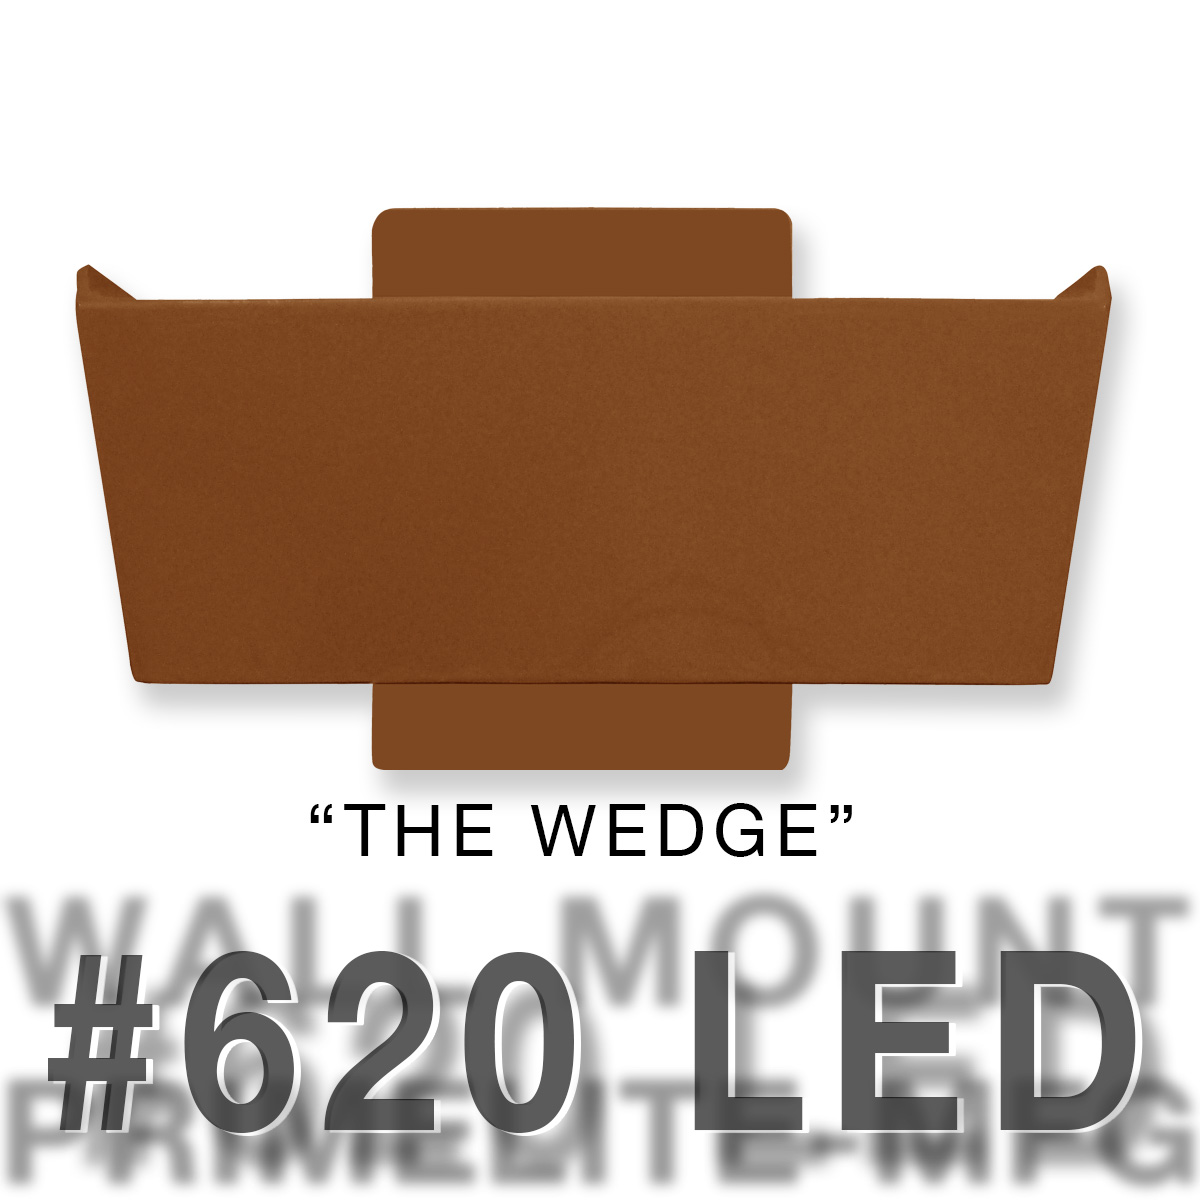 The Wedge - Wall Mounted #620LED